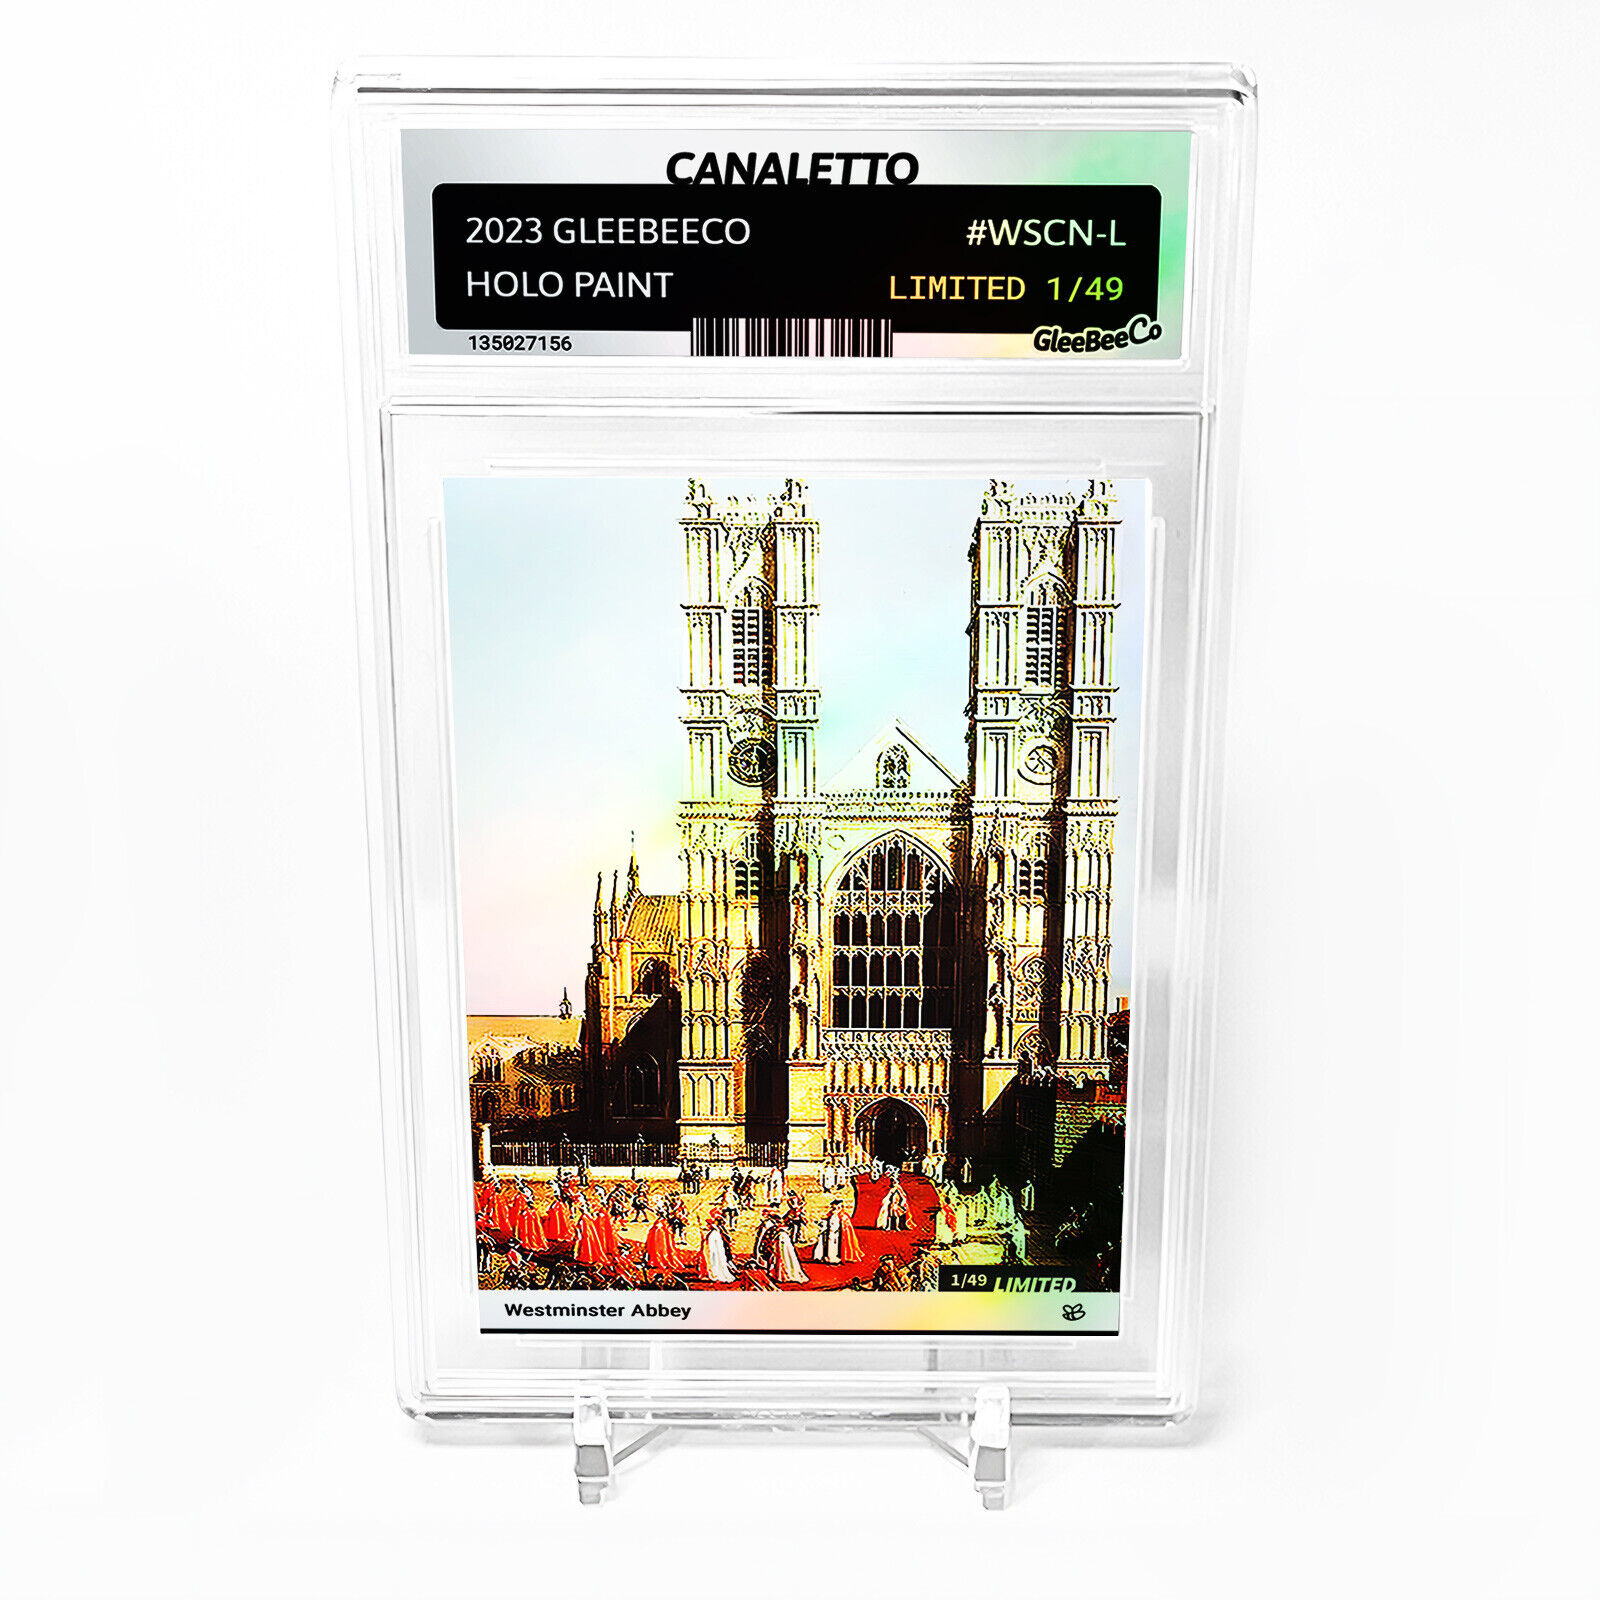 WESTMINSTER ABBEY Canaletto Card 2023 GleeBeeCo Holo Paint #WSCN-L /49 Made